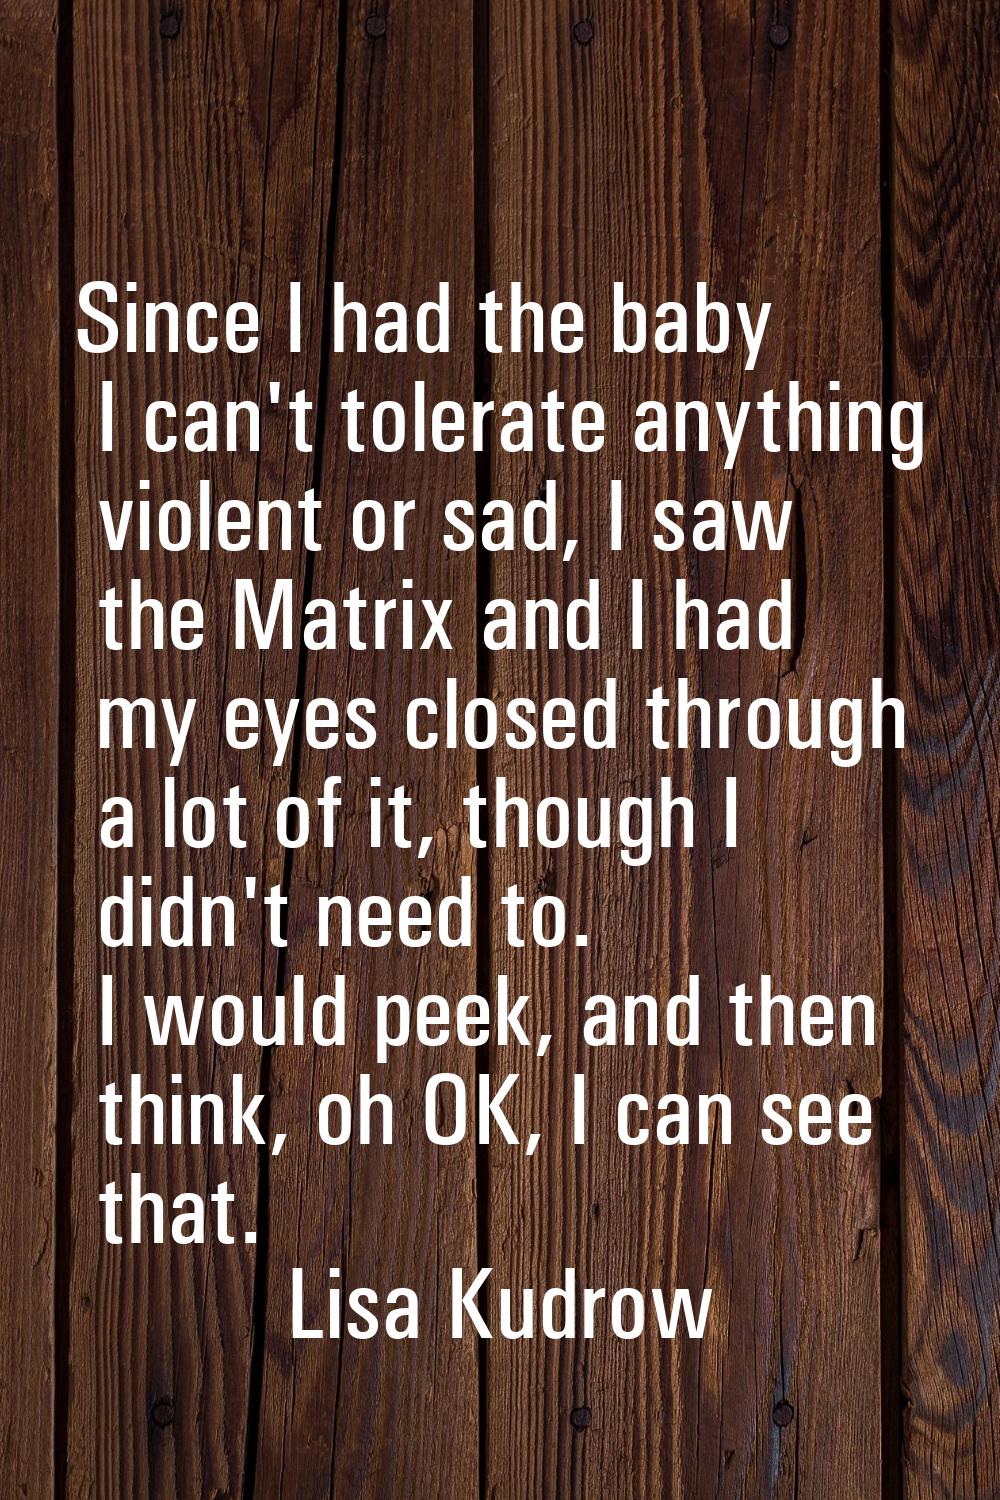 Since I had the baby I can't tolerate anything violent or sad, I saw the Matrix and I had my eyes c